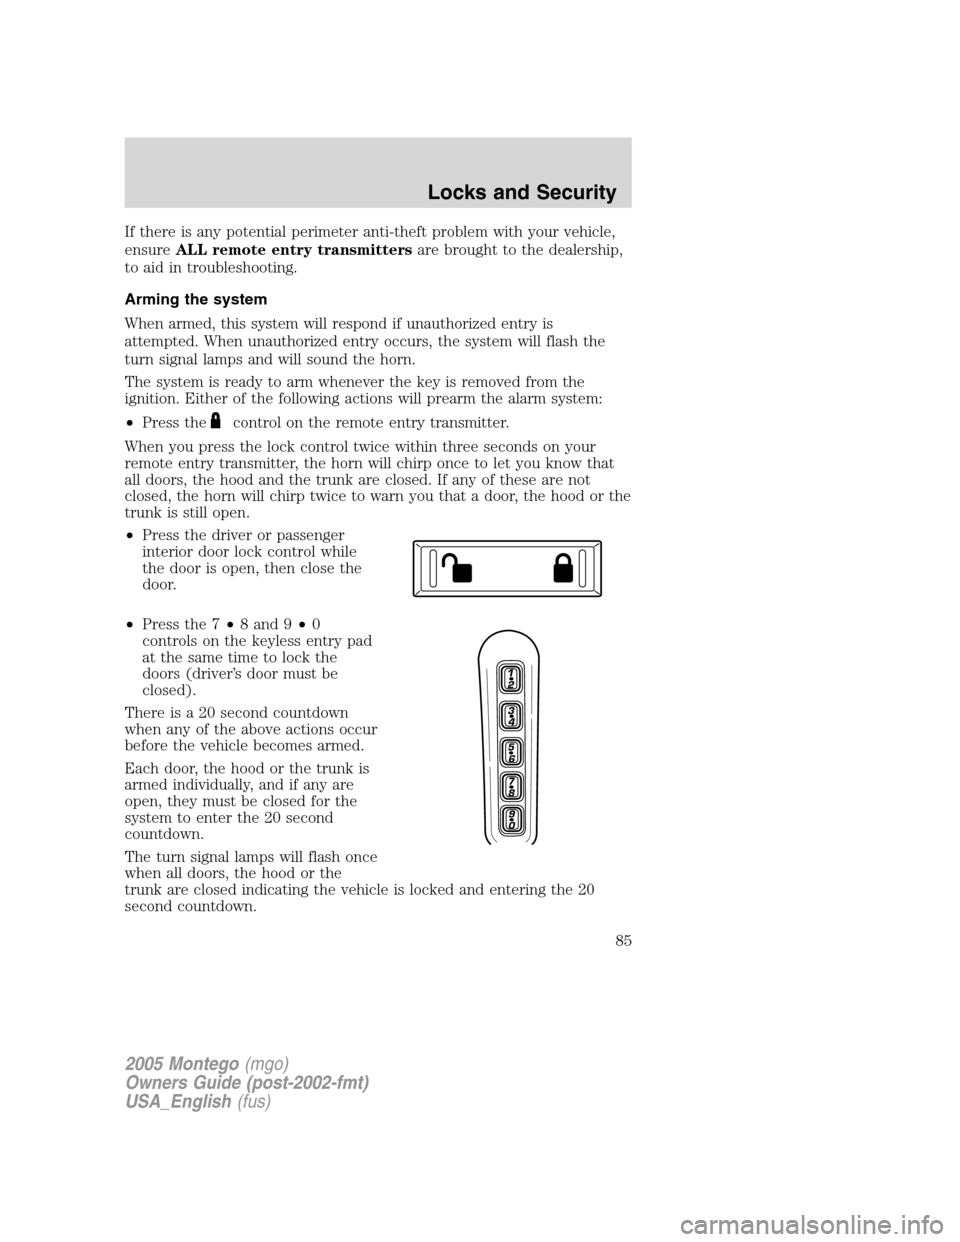 Mercury Montego 2005  Owners Manuals If there is any potential perimeter anti-theft problem with your vehicle,
ensureALL remote entry transmittersare brought to the dealership,
to aid in troubleshooting.
Arming the system
When armed, thi